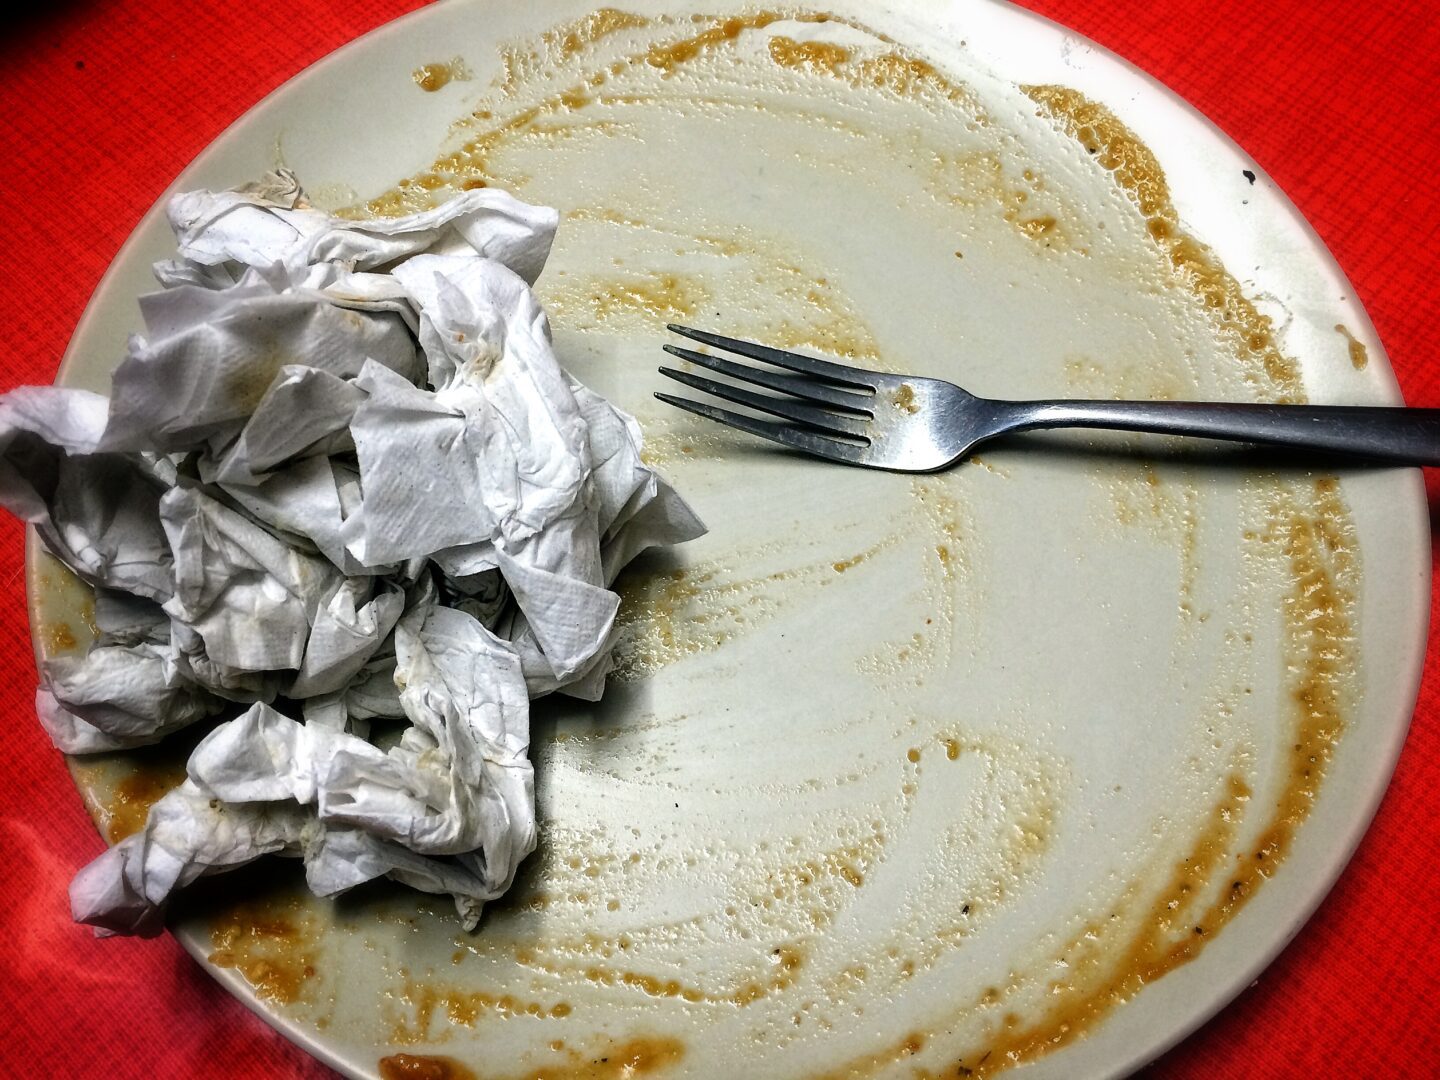 A plate with a fork and a piece of paper.